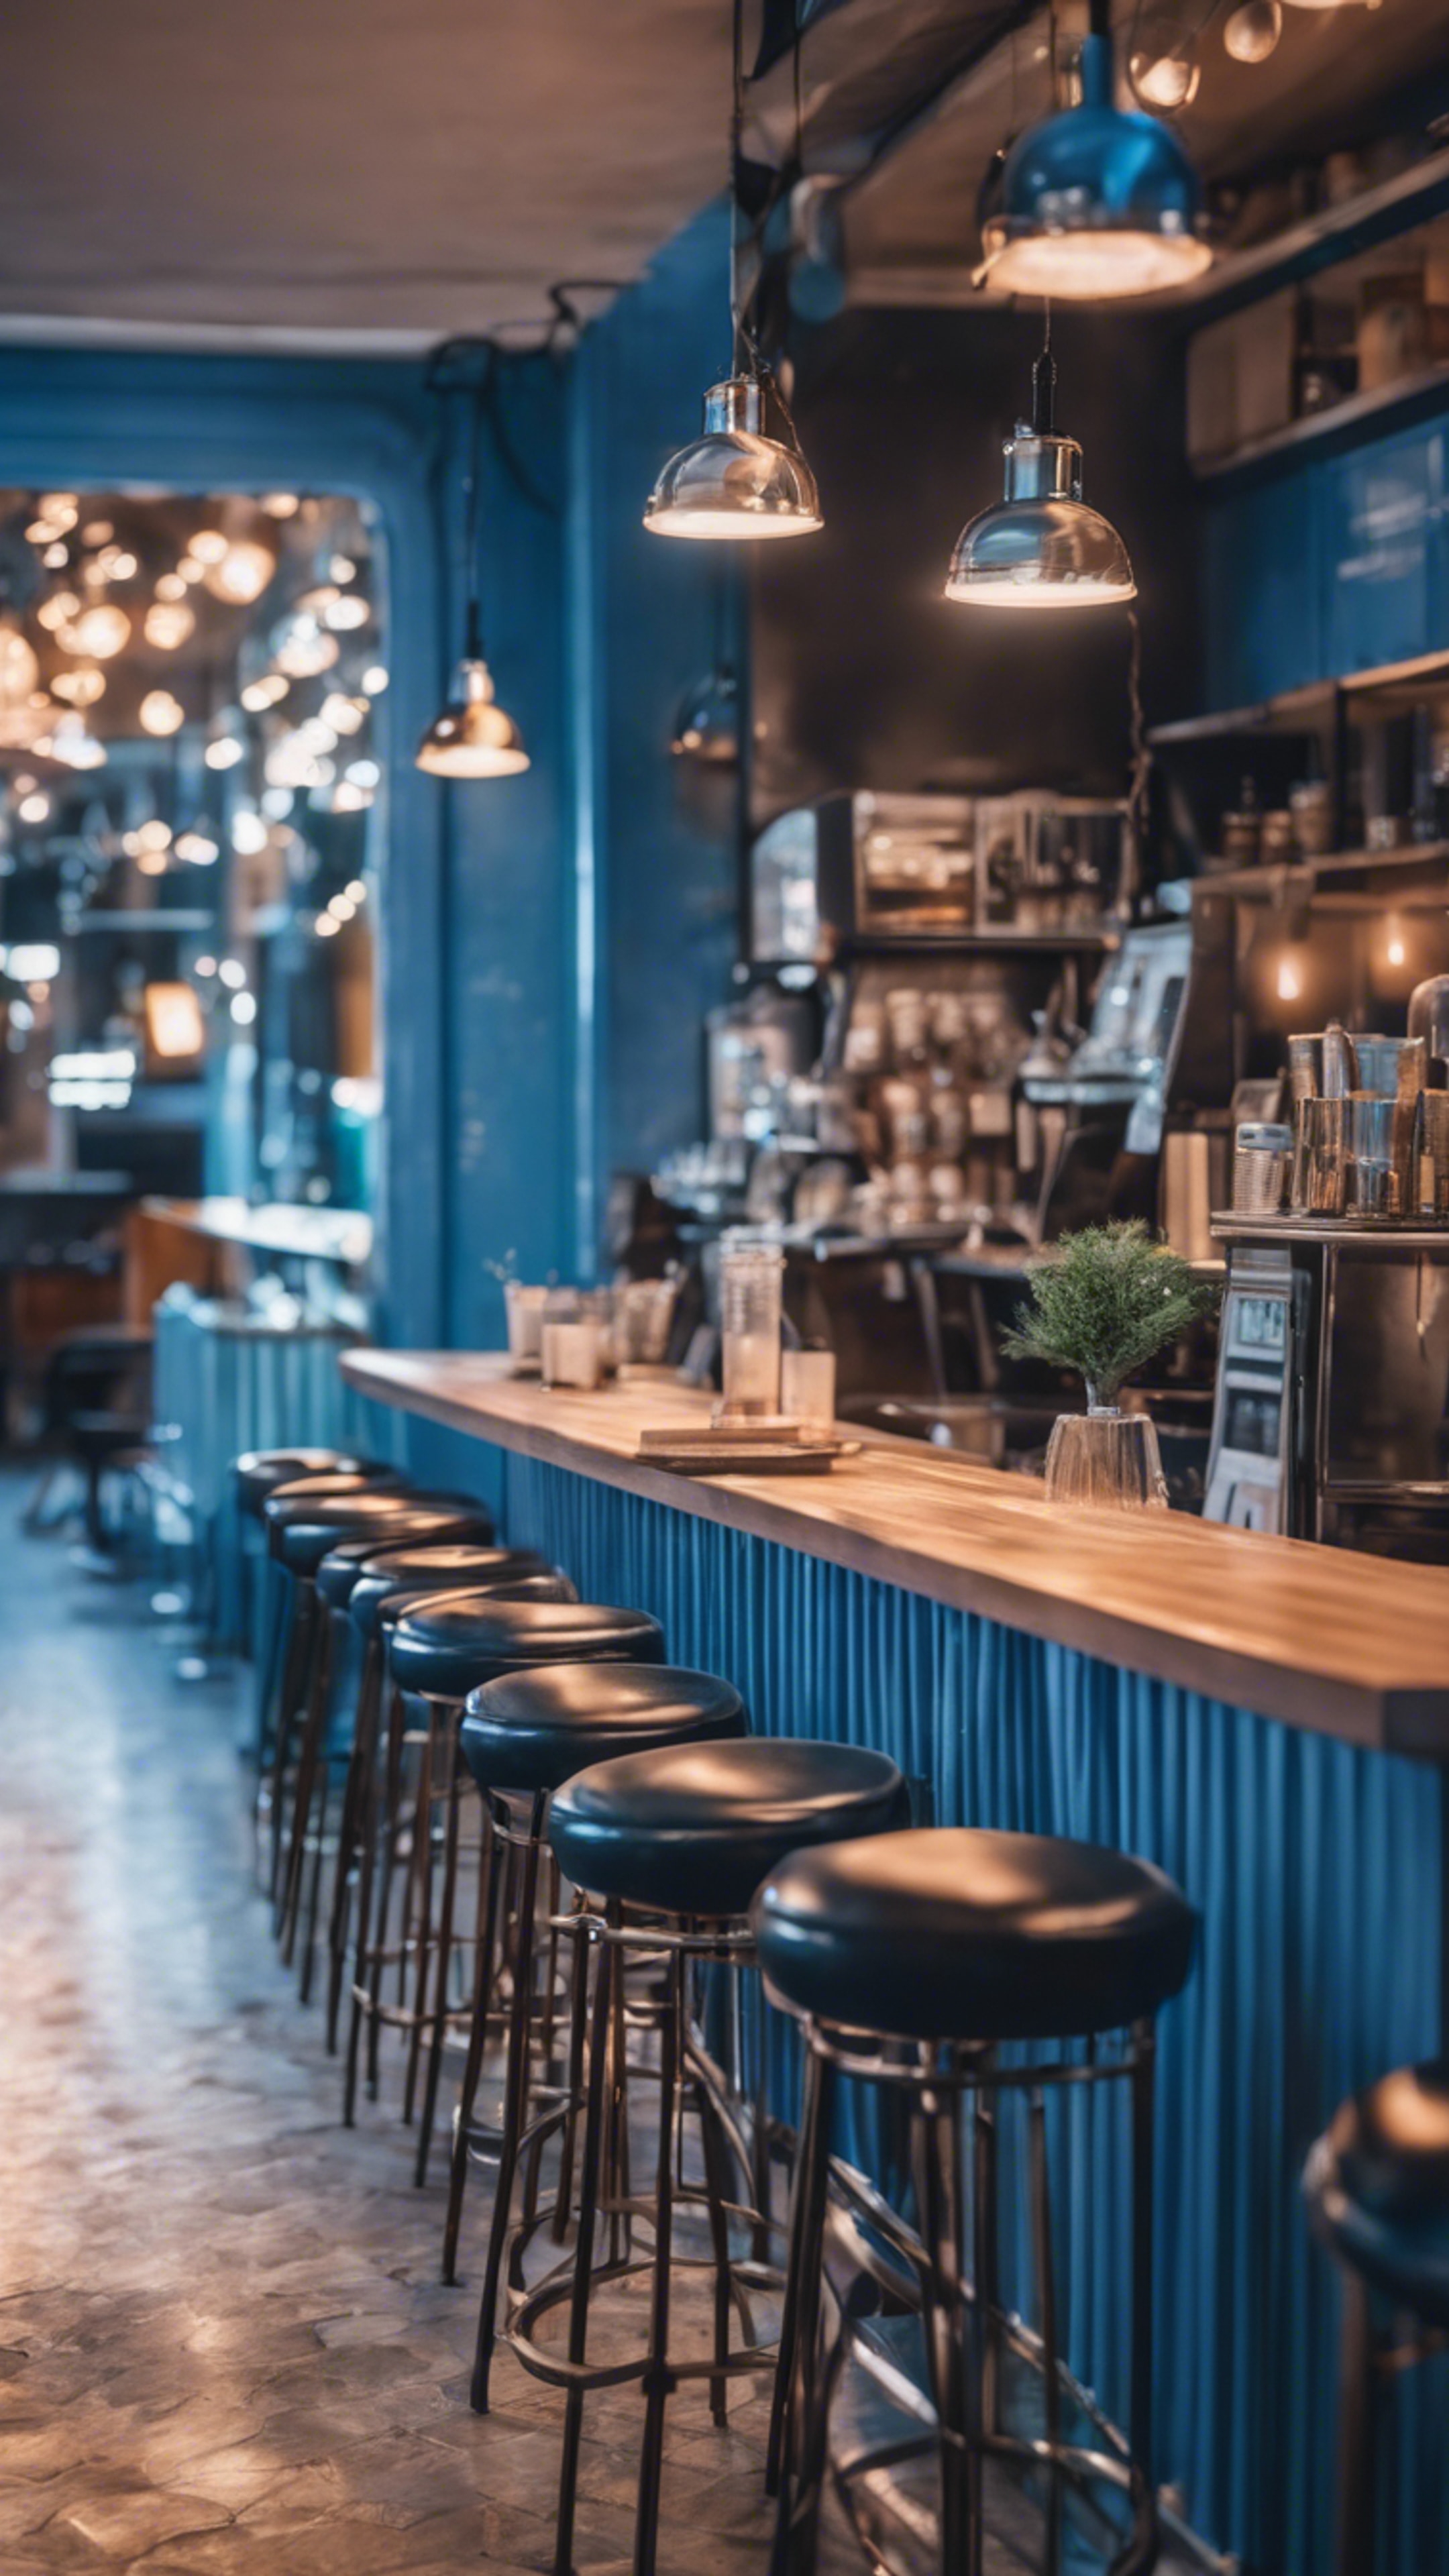 A chic urban cafe with cool blue interiors in the evening Шпалери[a944bfd98f8948b498de]